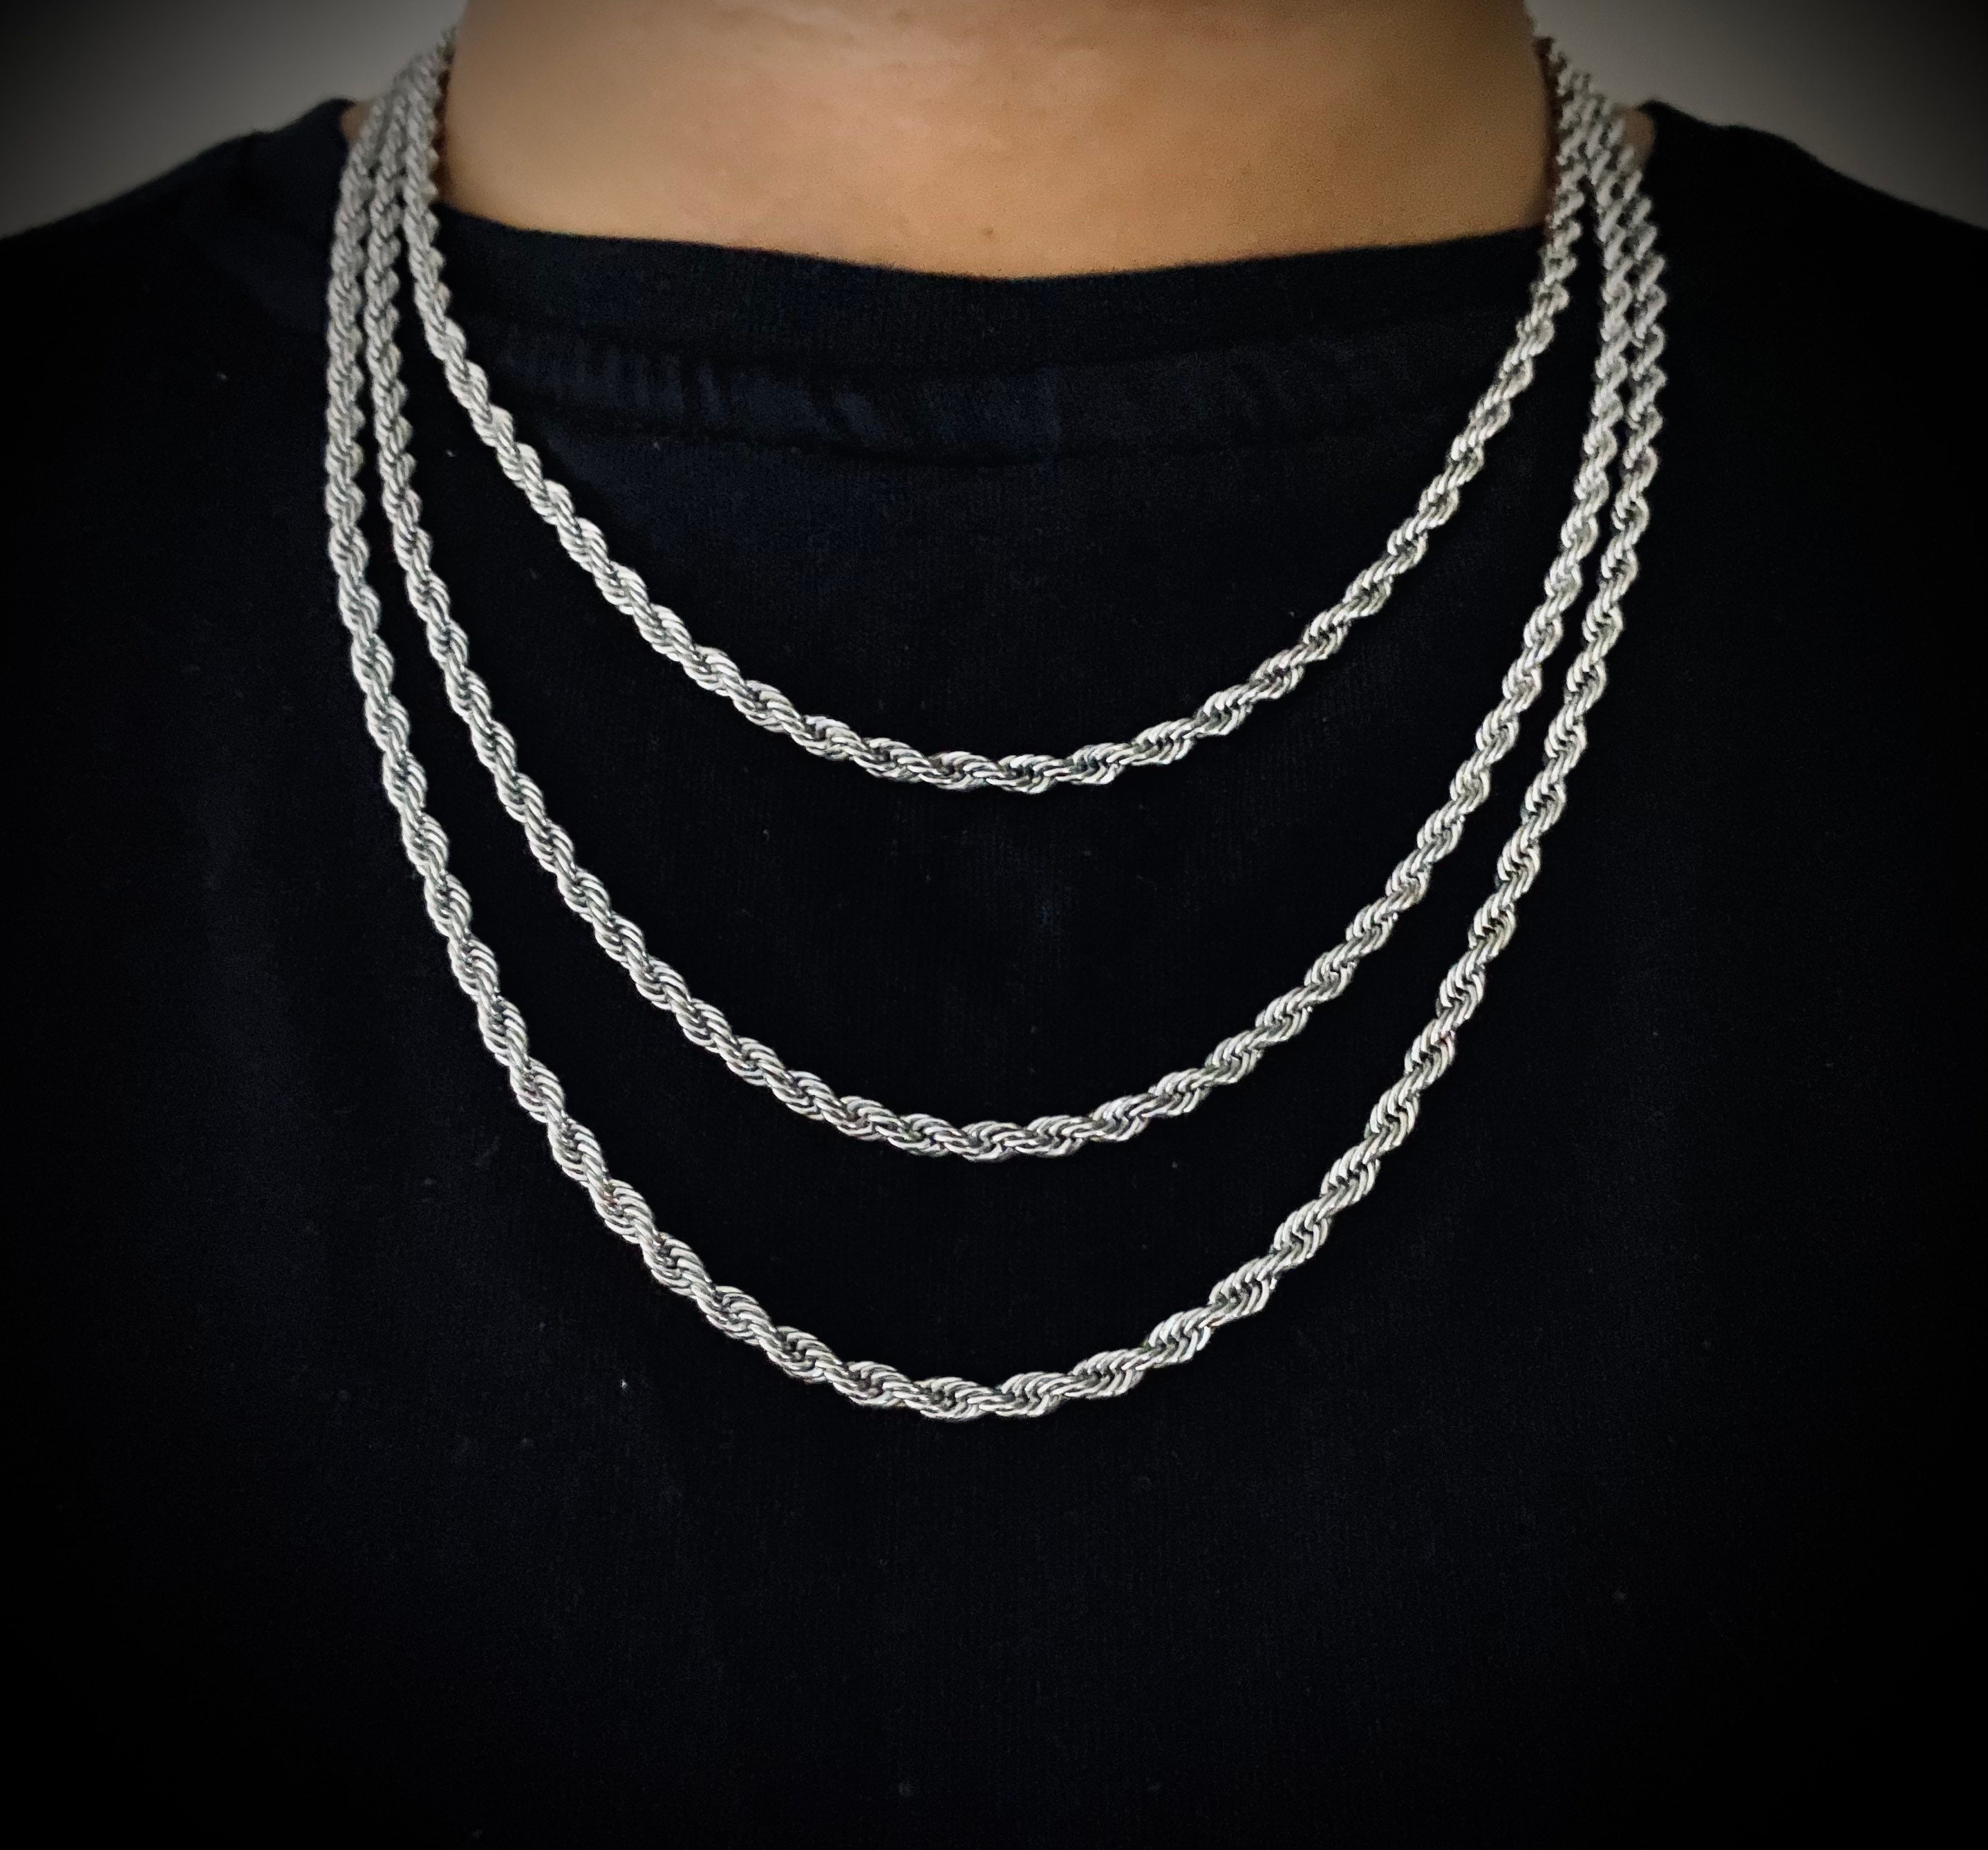 Silver Thin Mens Chain Cuban Necklace Stainless Steel Chain - 16 18 20 22 24 26 - Mens Jewelry - Mens Necklace Chain - Gifts for Men